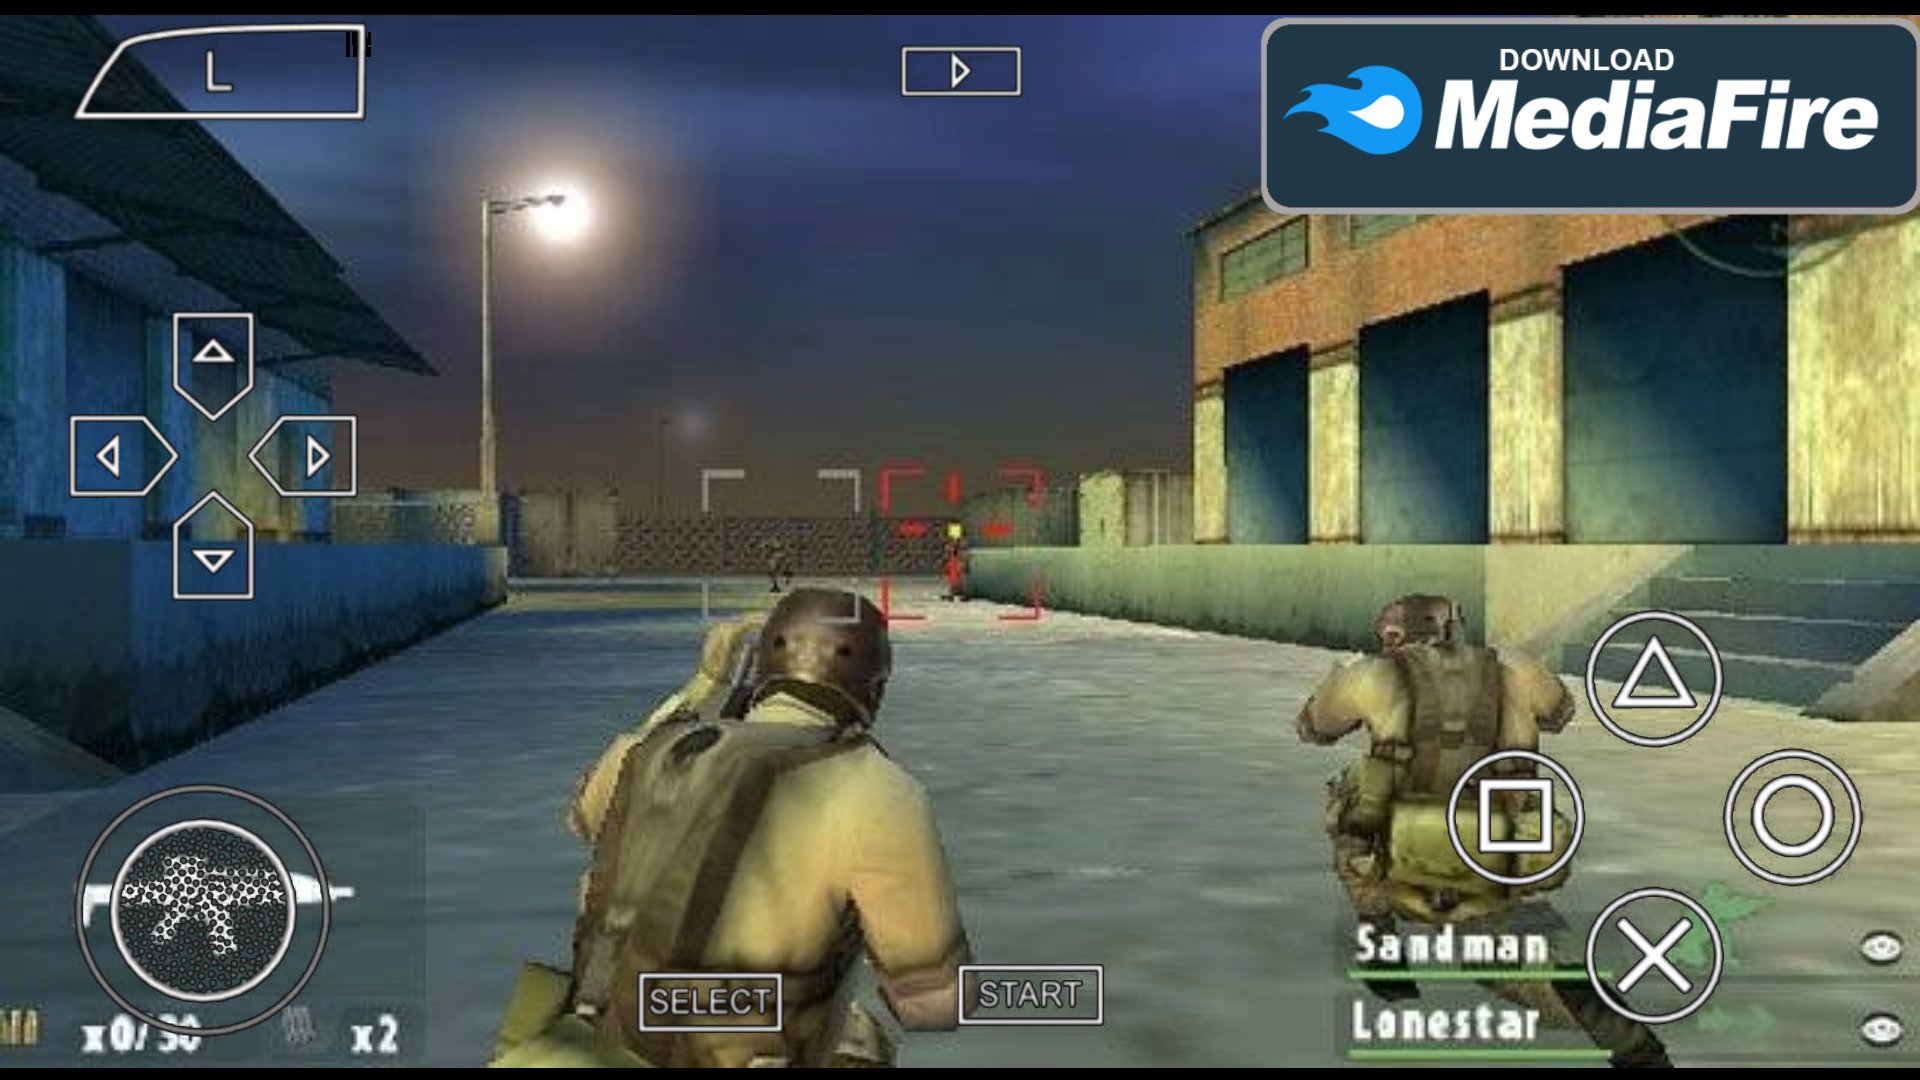 Gta 5 PPSSPP highly compressed iso file apk for Android 150 mb 